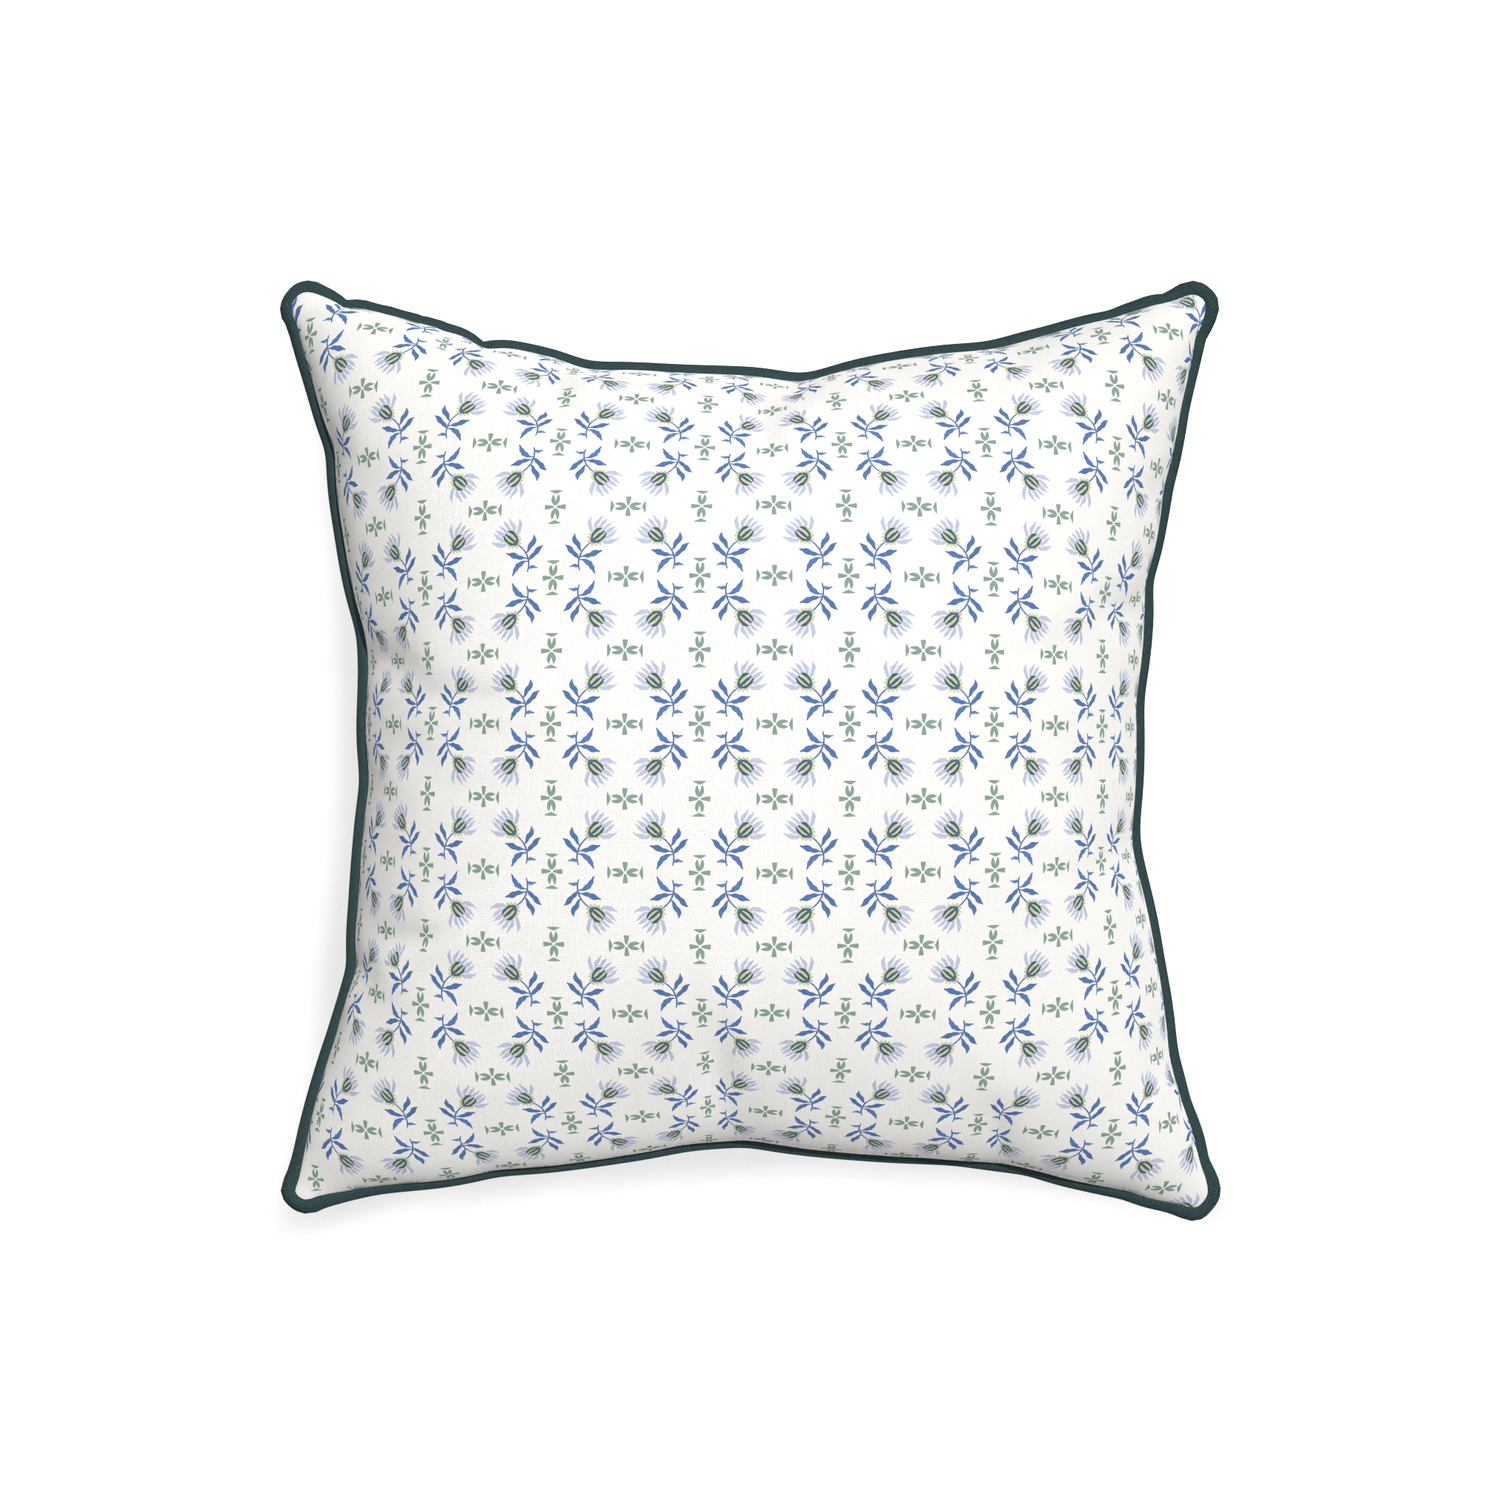 20-square lee custom blue & green floralpillow with p piping on white background